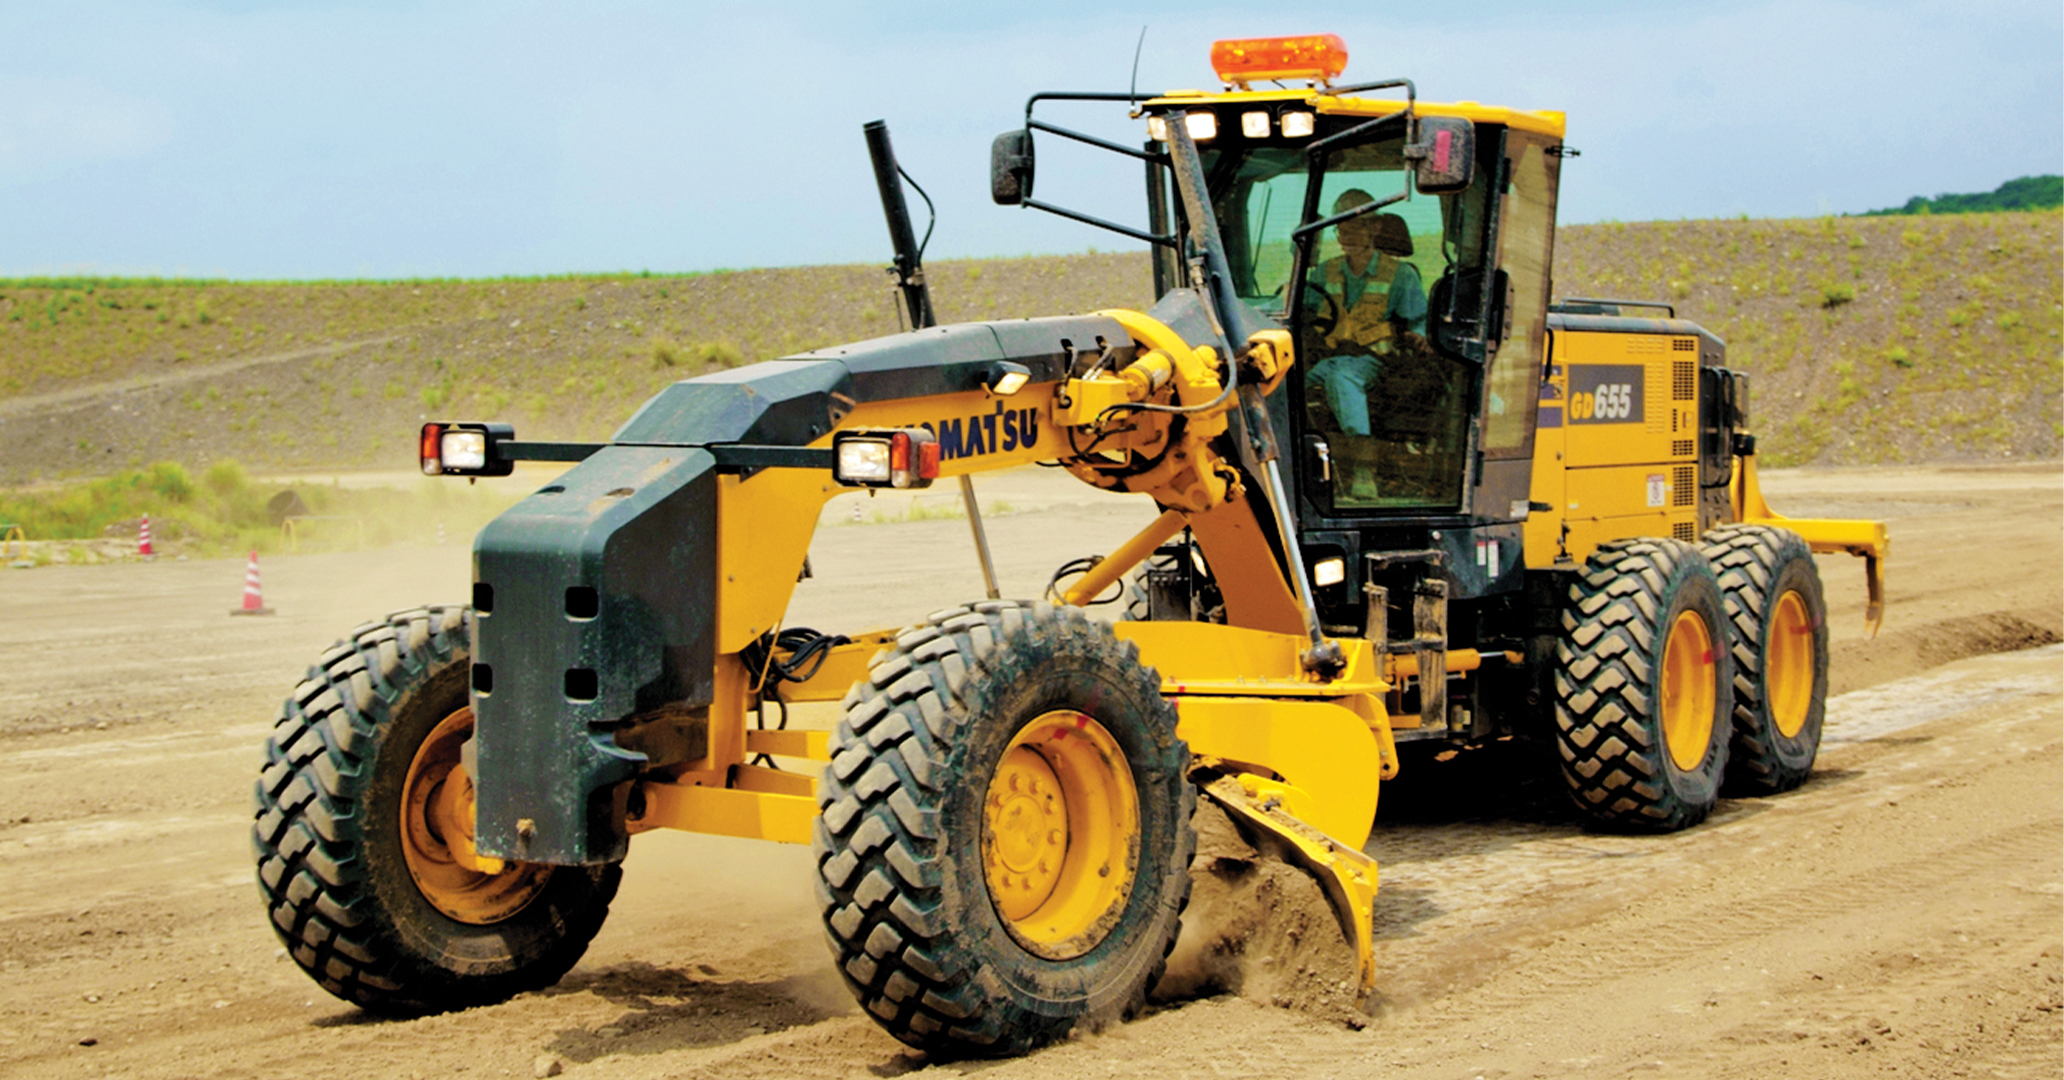 Read more about the article Komatsu GD655-7 Motor Graders with 2D Cross Slope System